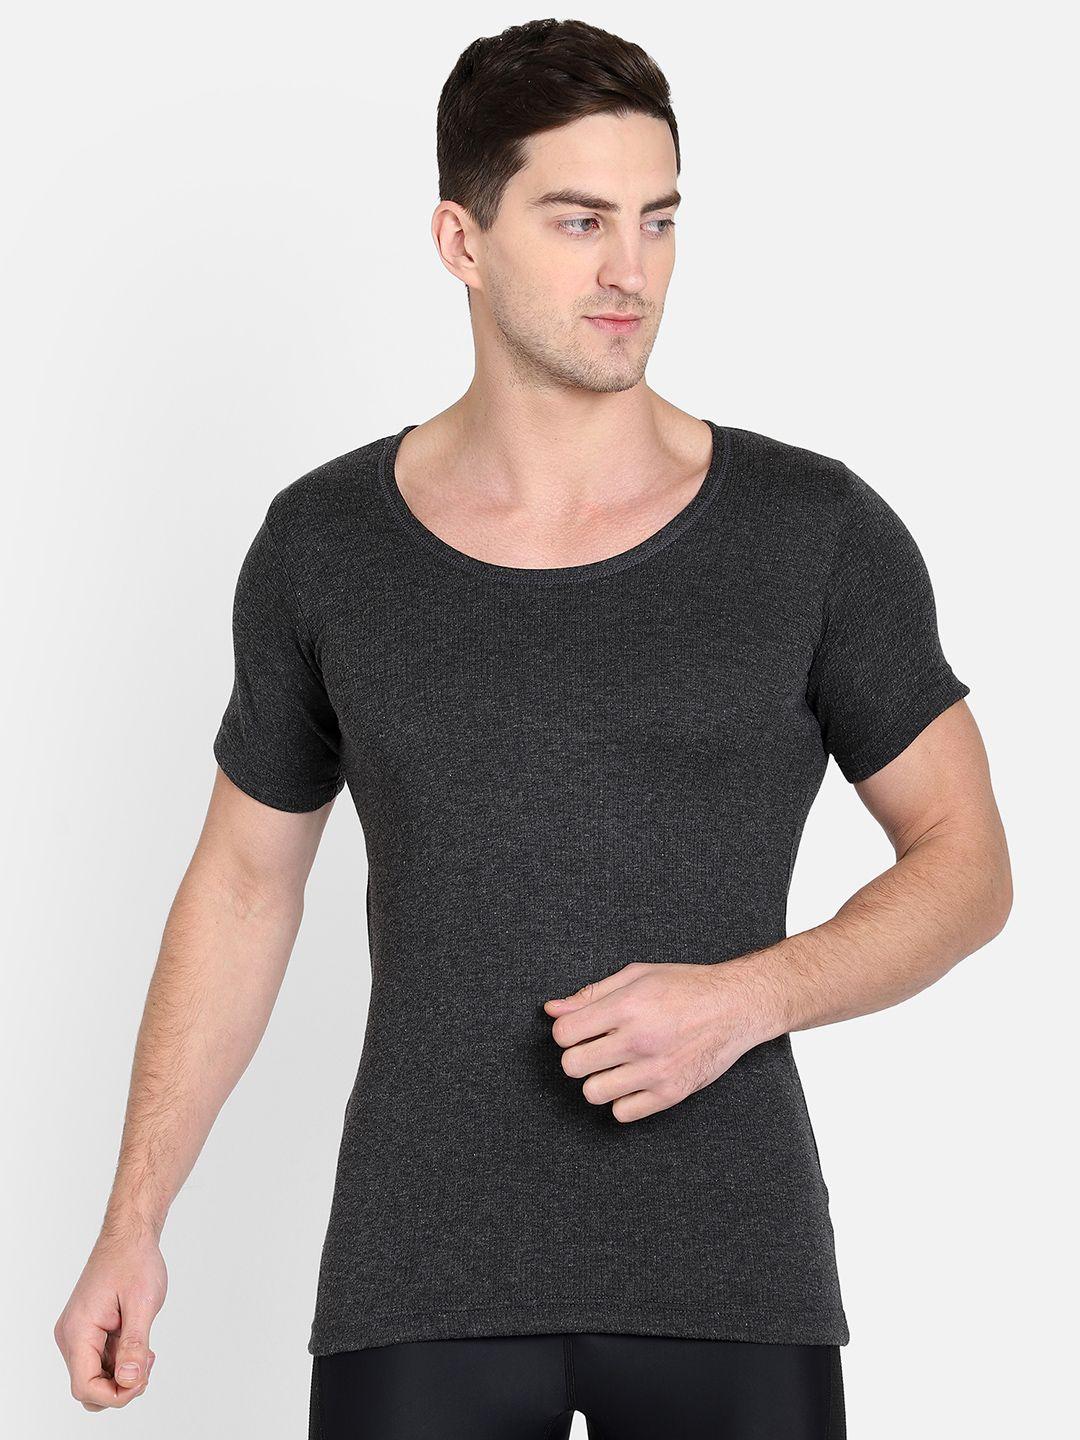 dyca men charcoal grey solid thermal t-shirt